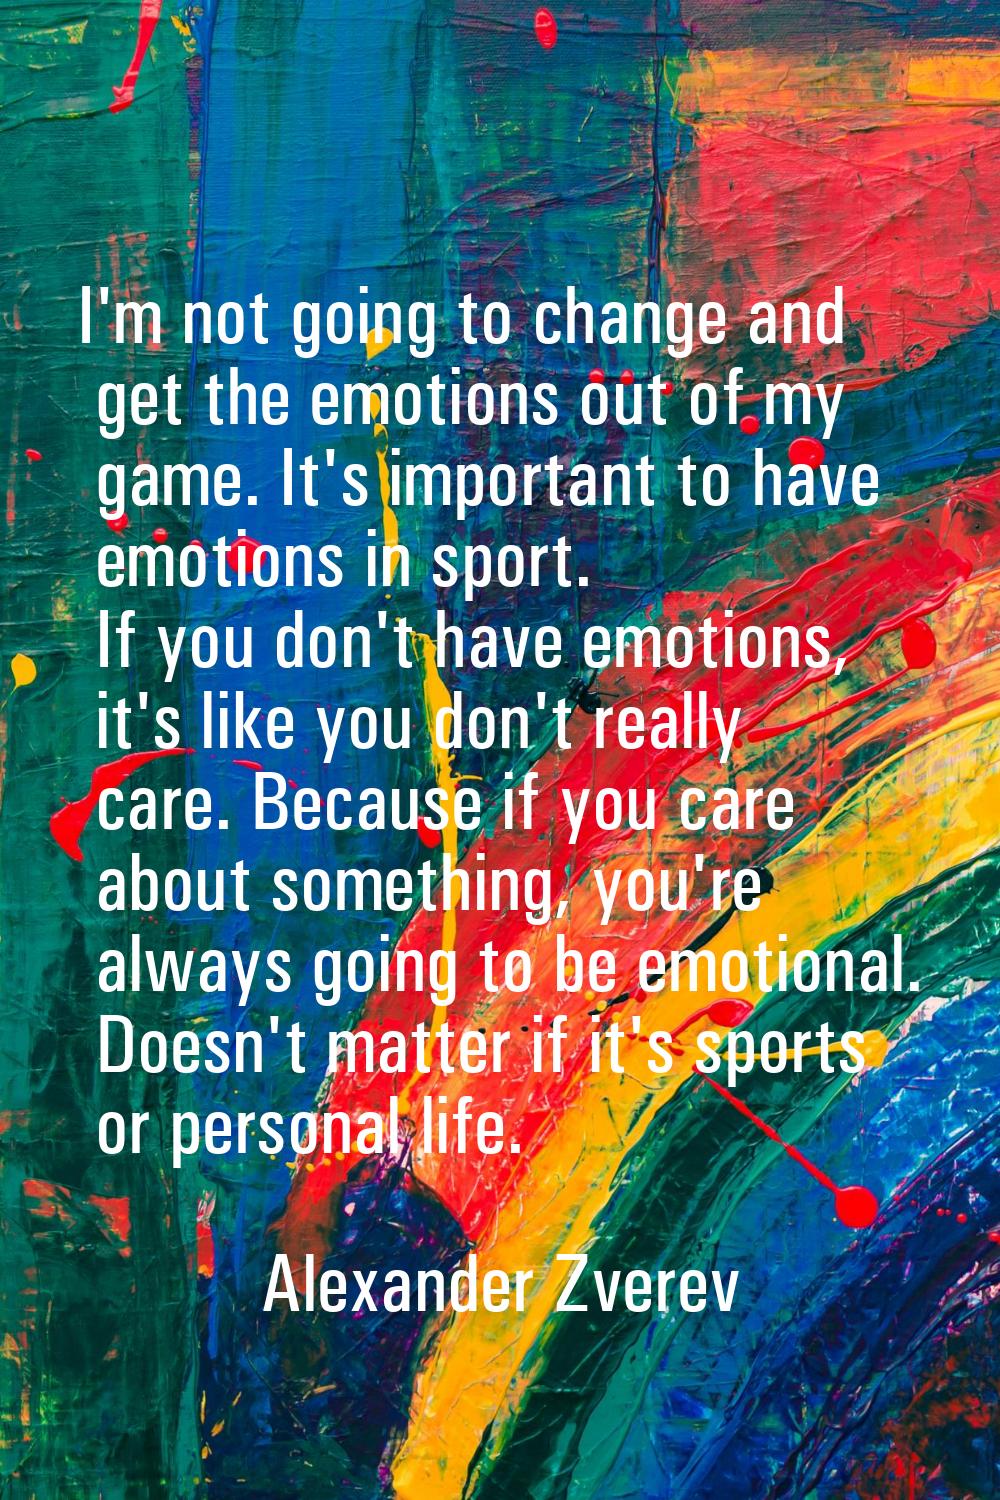 I'm not going to change and get the emotions out of my game. It's important to have emotions in spo